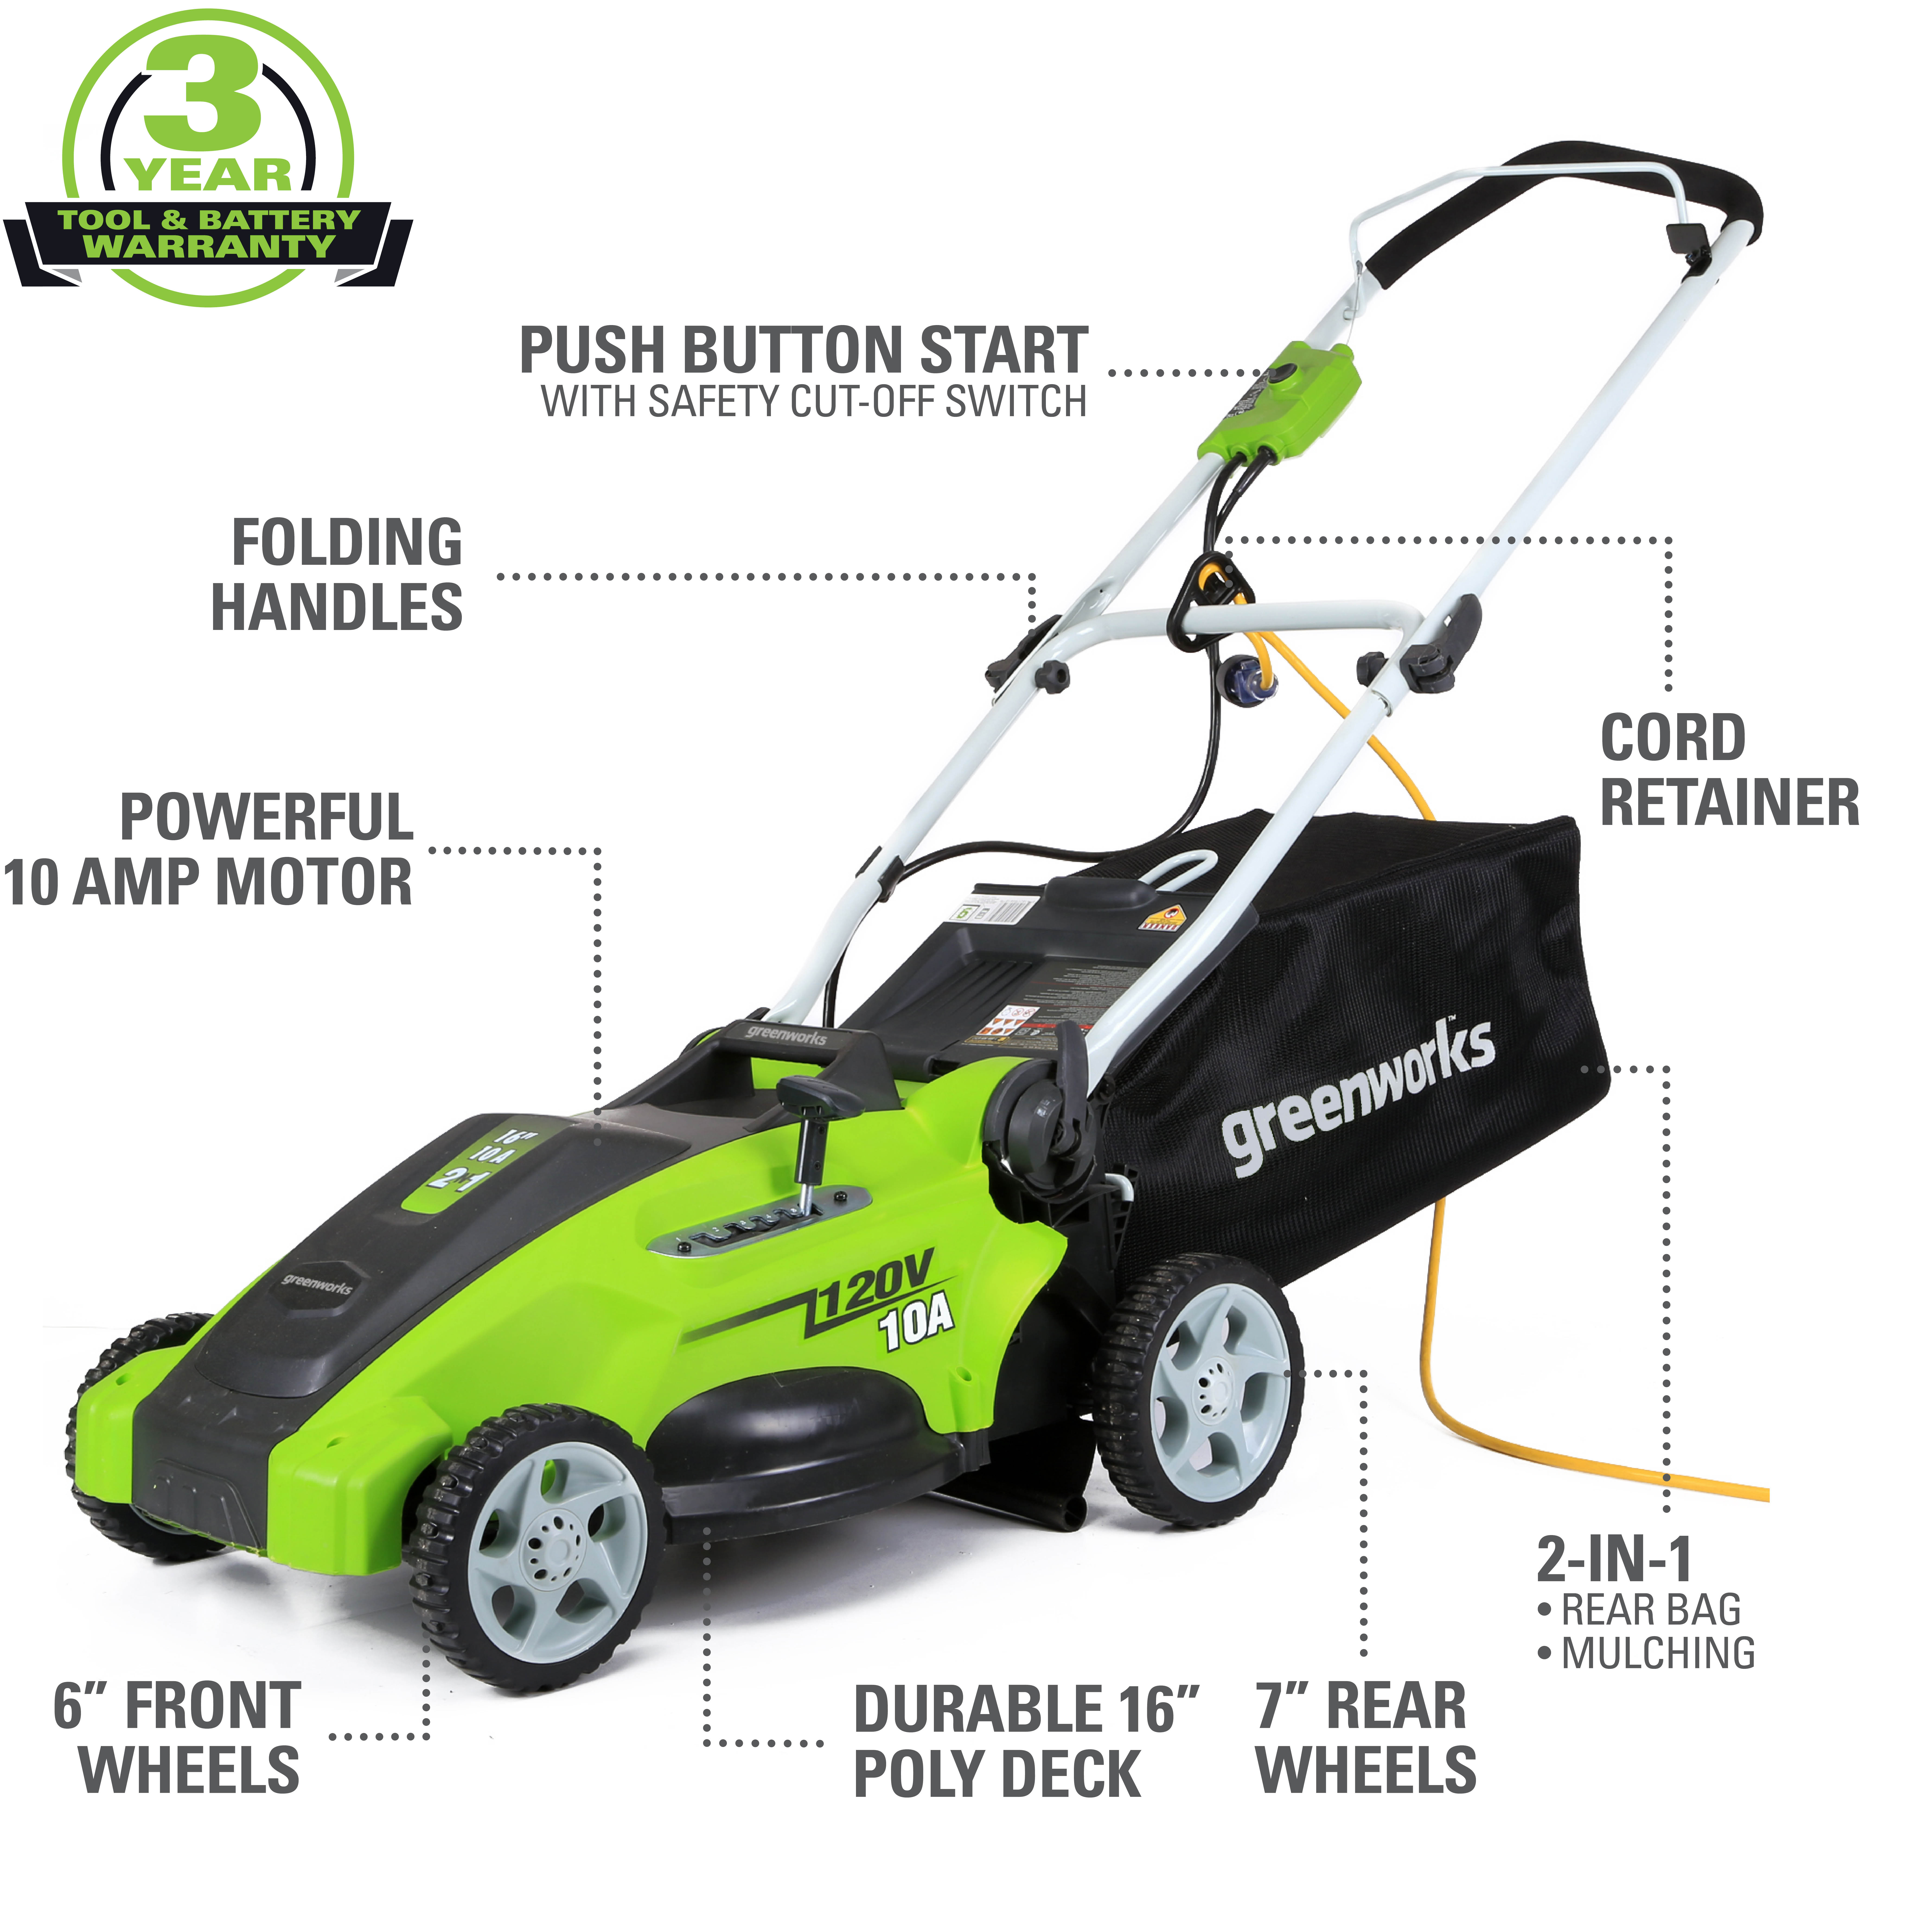 Greenworks 16" Corded Electric 10 Amp Walk-Behind Push Lawn Mower 25142 - image 2 of 11